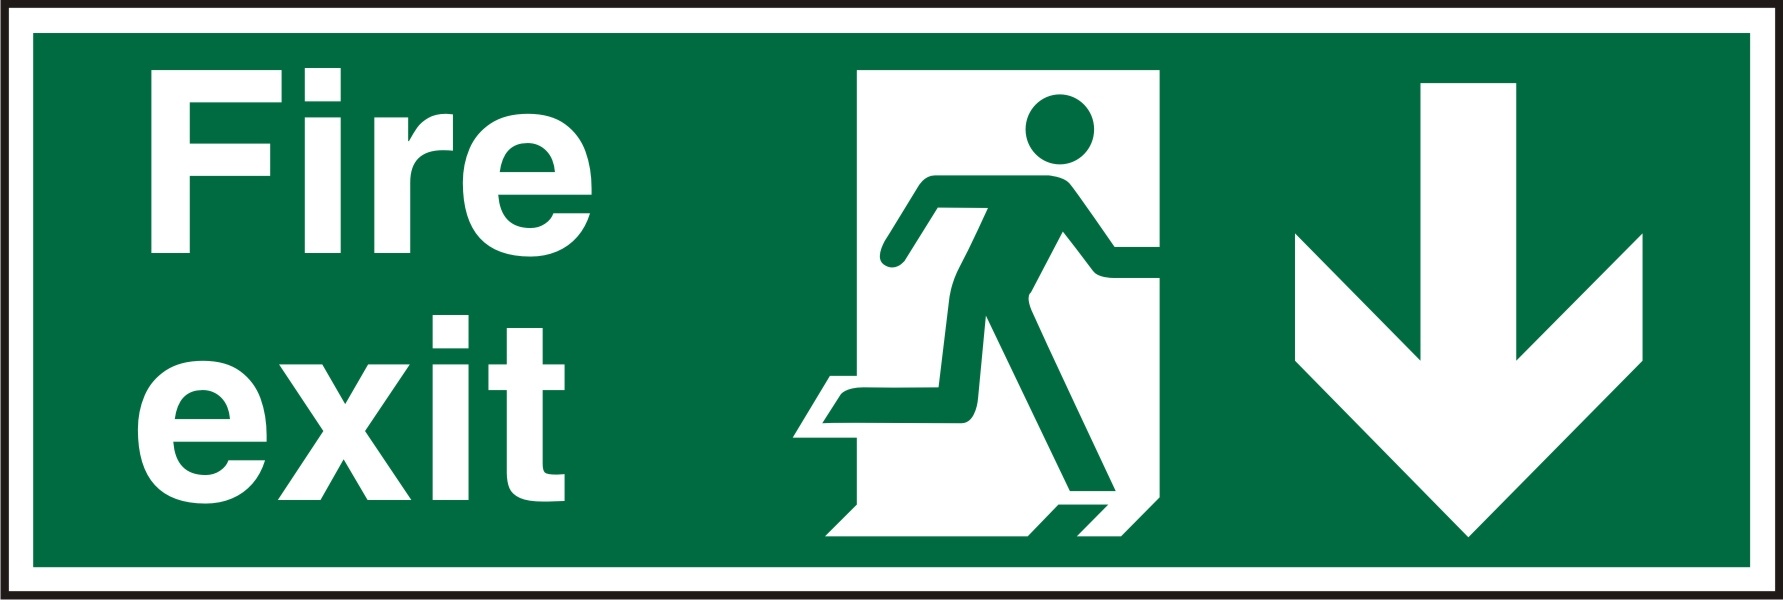 Exit Signs Pictures | Free Download Best Exit Signs Pictures On - Free Printable Exit Signs With Arrow